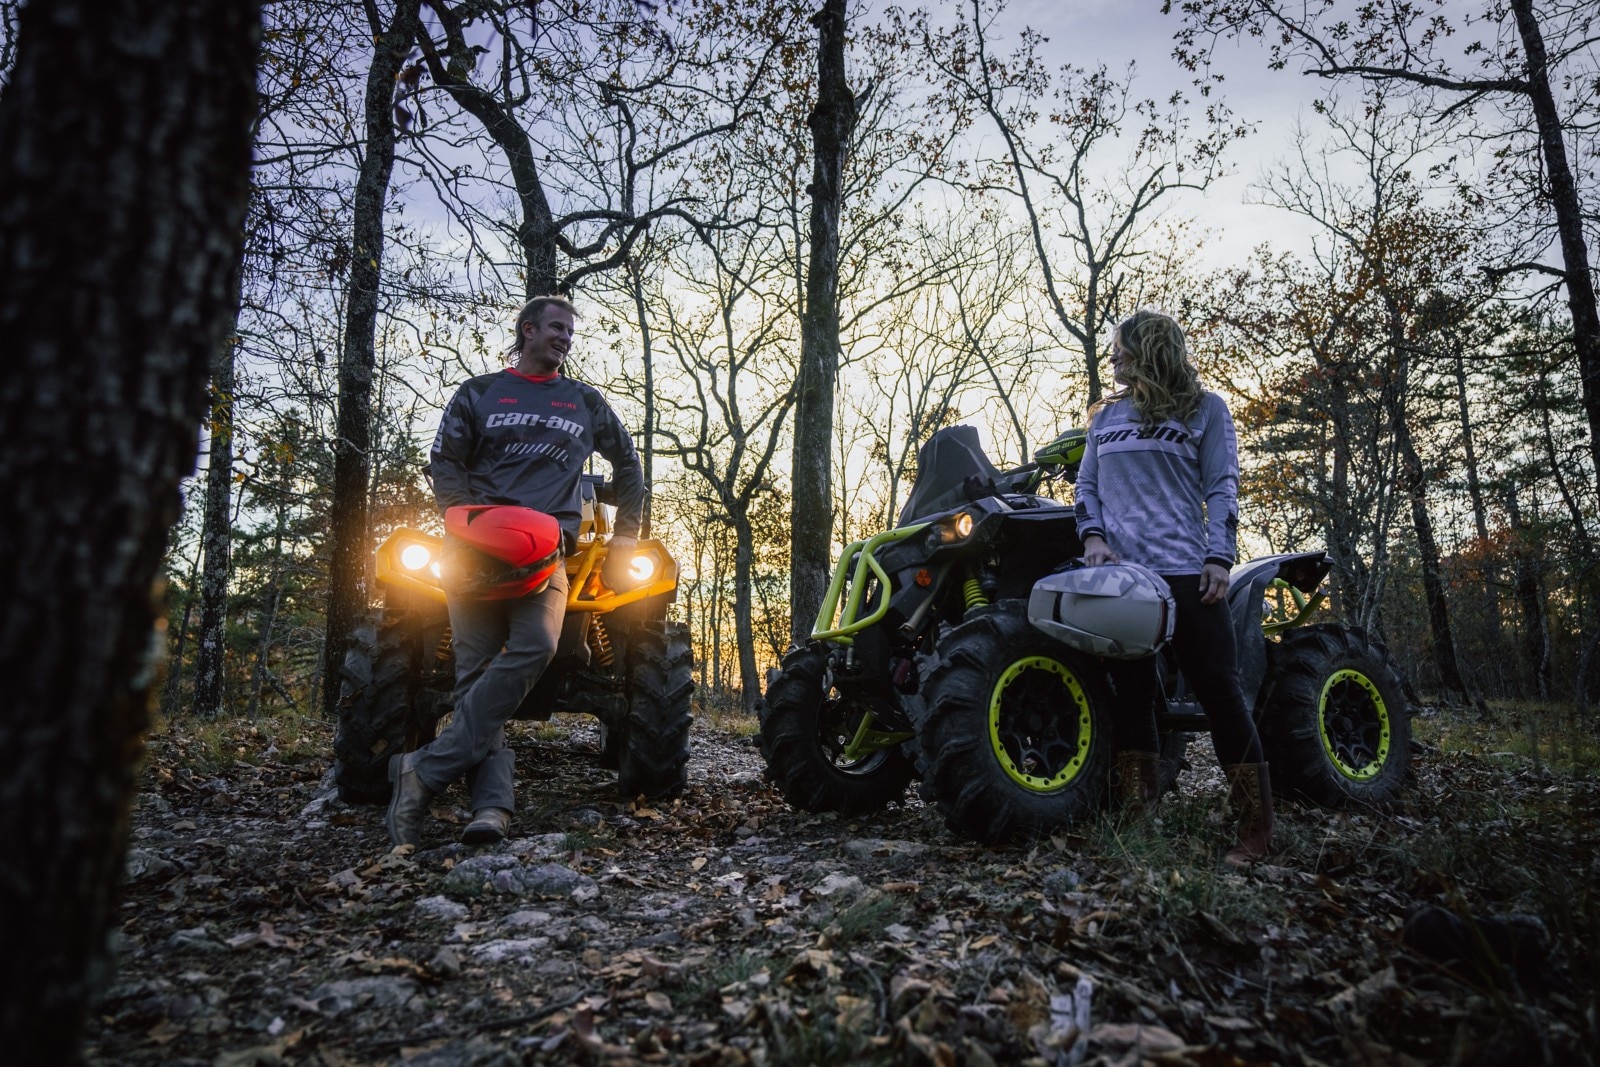 Two ATV riders dressed in Can-Am apparel with the sun setting behind.